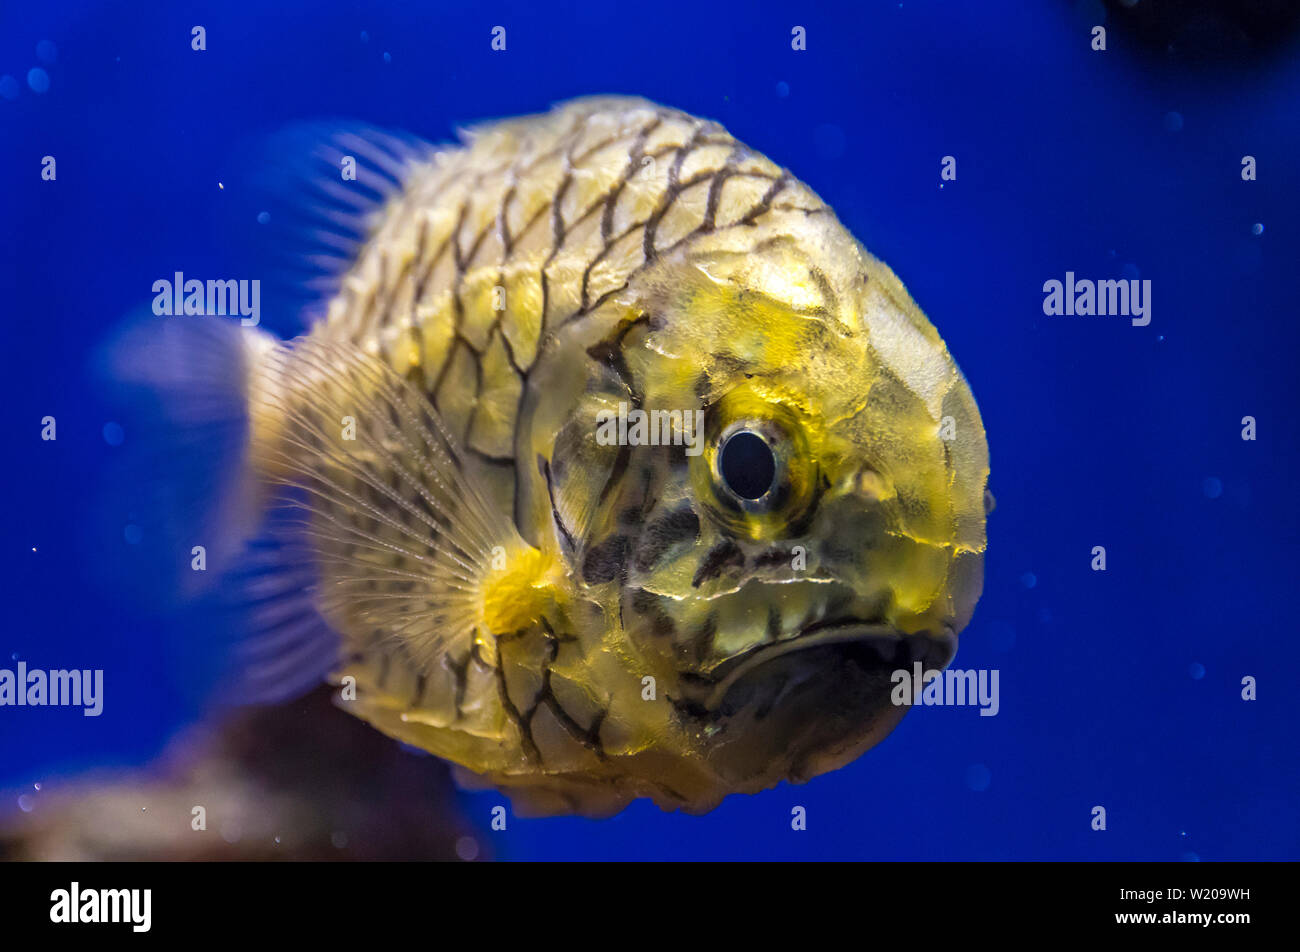 Pineapplefish (Cleidopus gloriamaris) seen underwater. It is also known as Knightfish, Coat-of-mail fish or Pine Cone fish. Is a species of fish in th Stock Photo